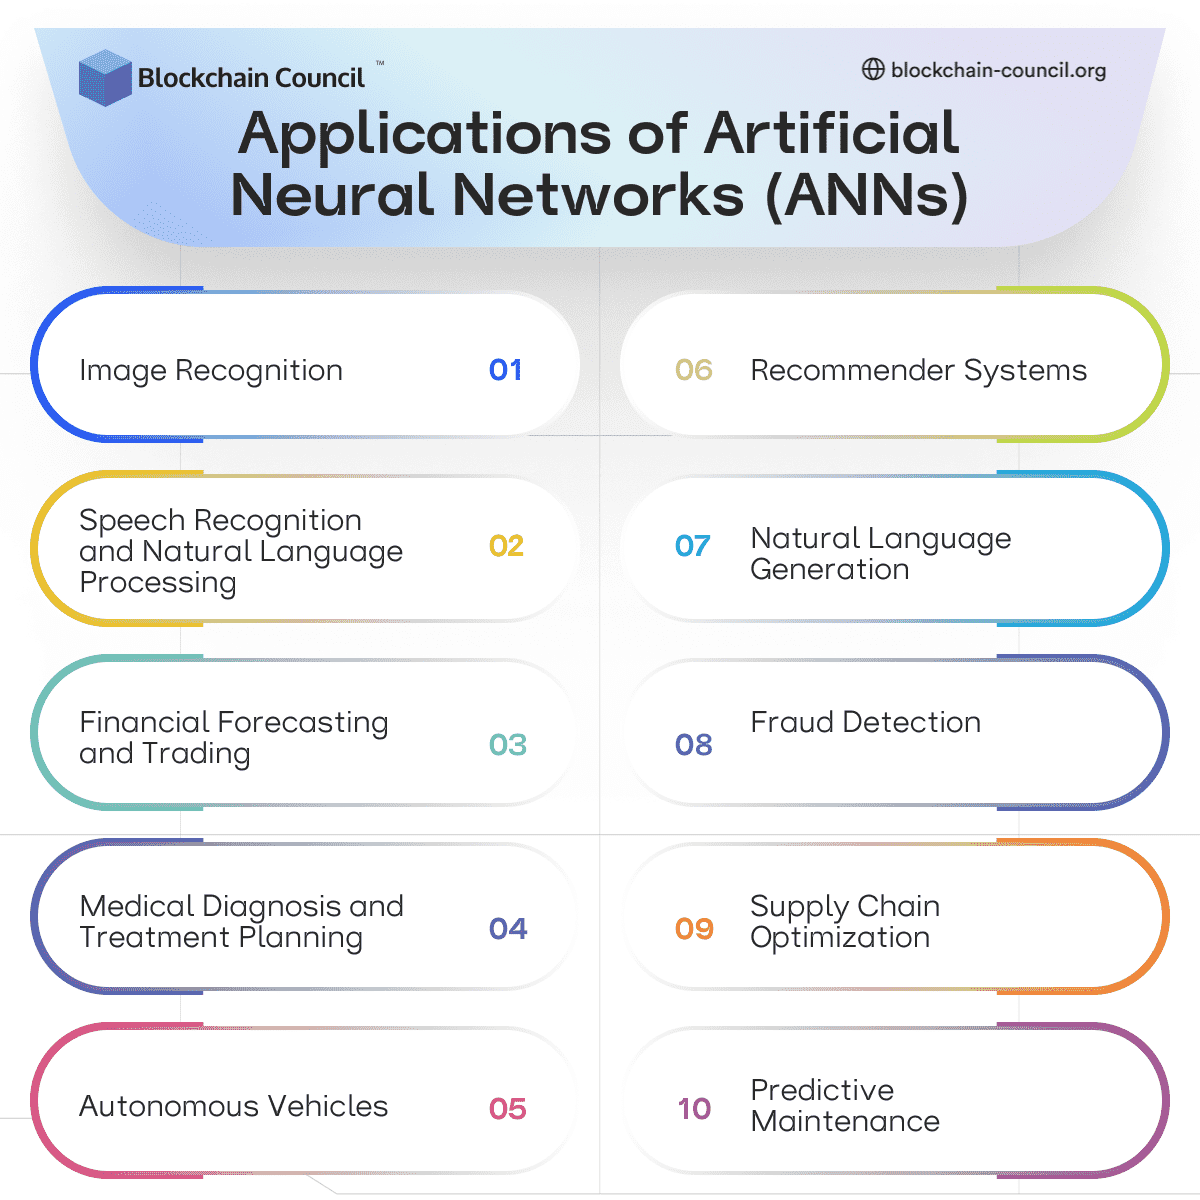 Applications of Artificial Neural Networks (ANNs)